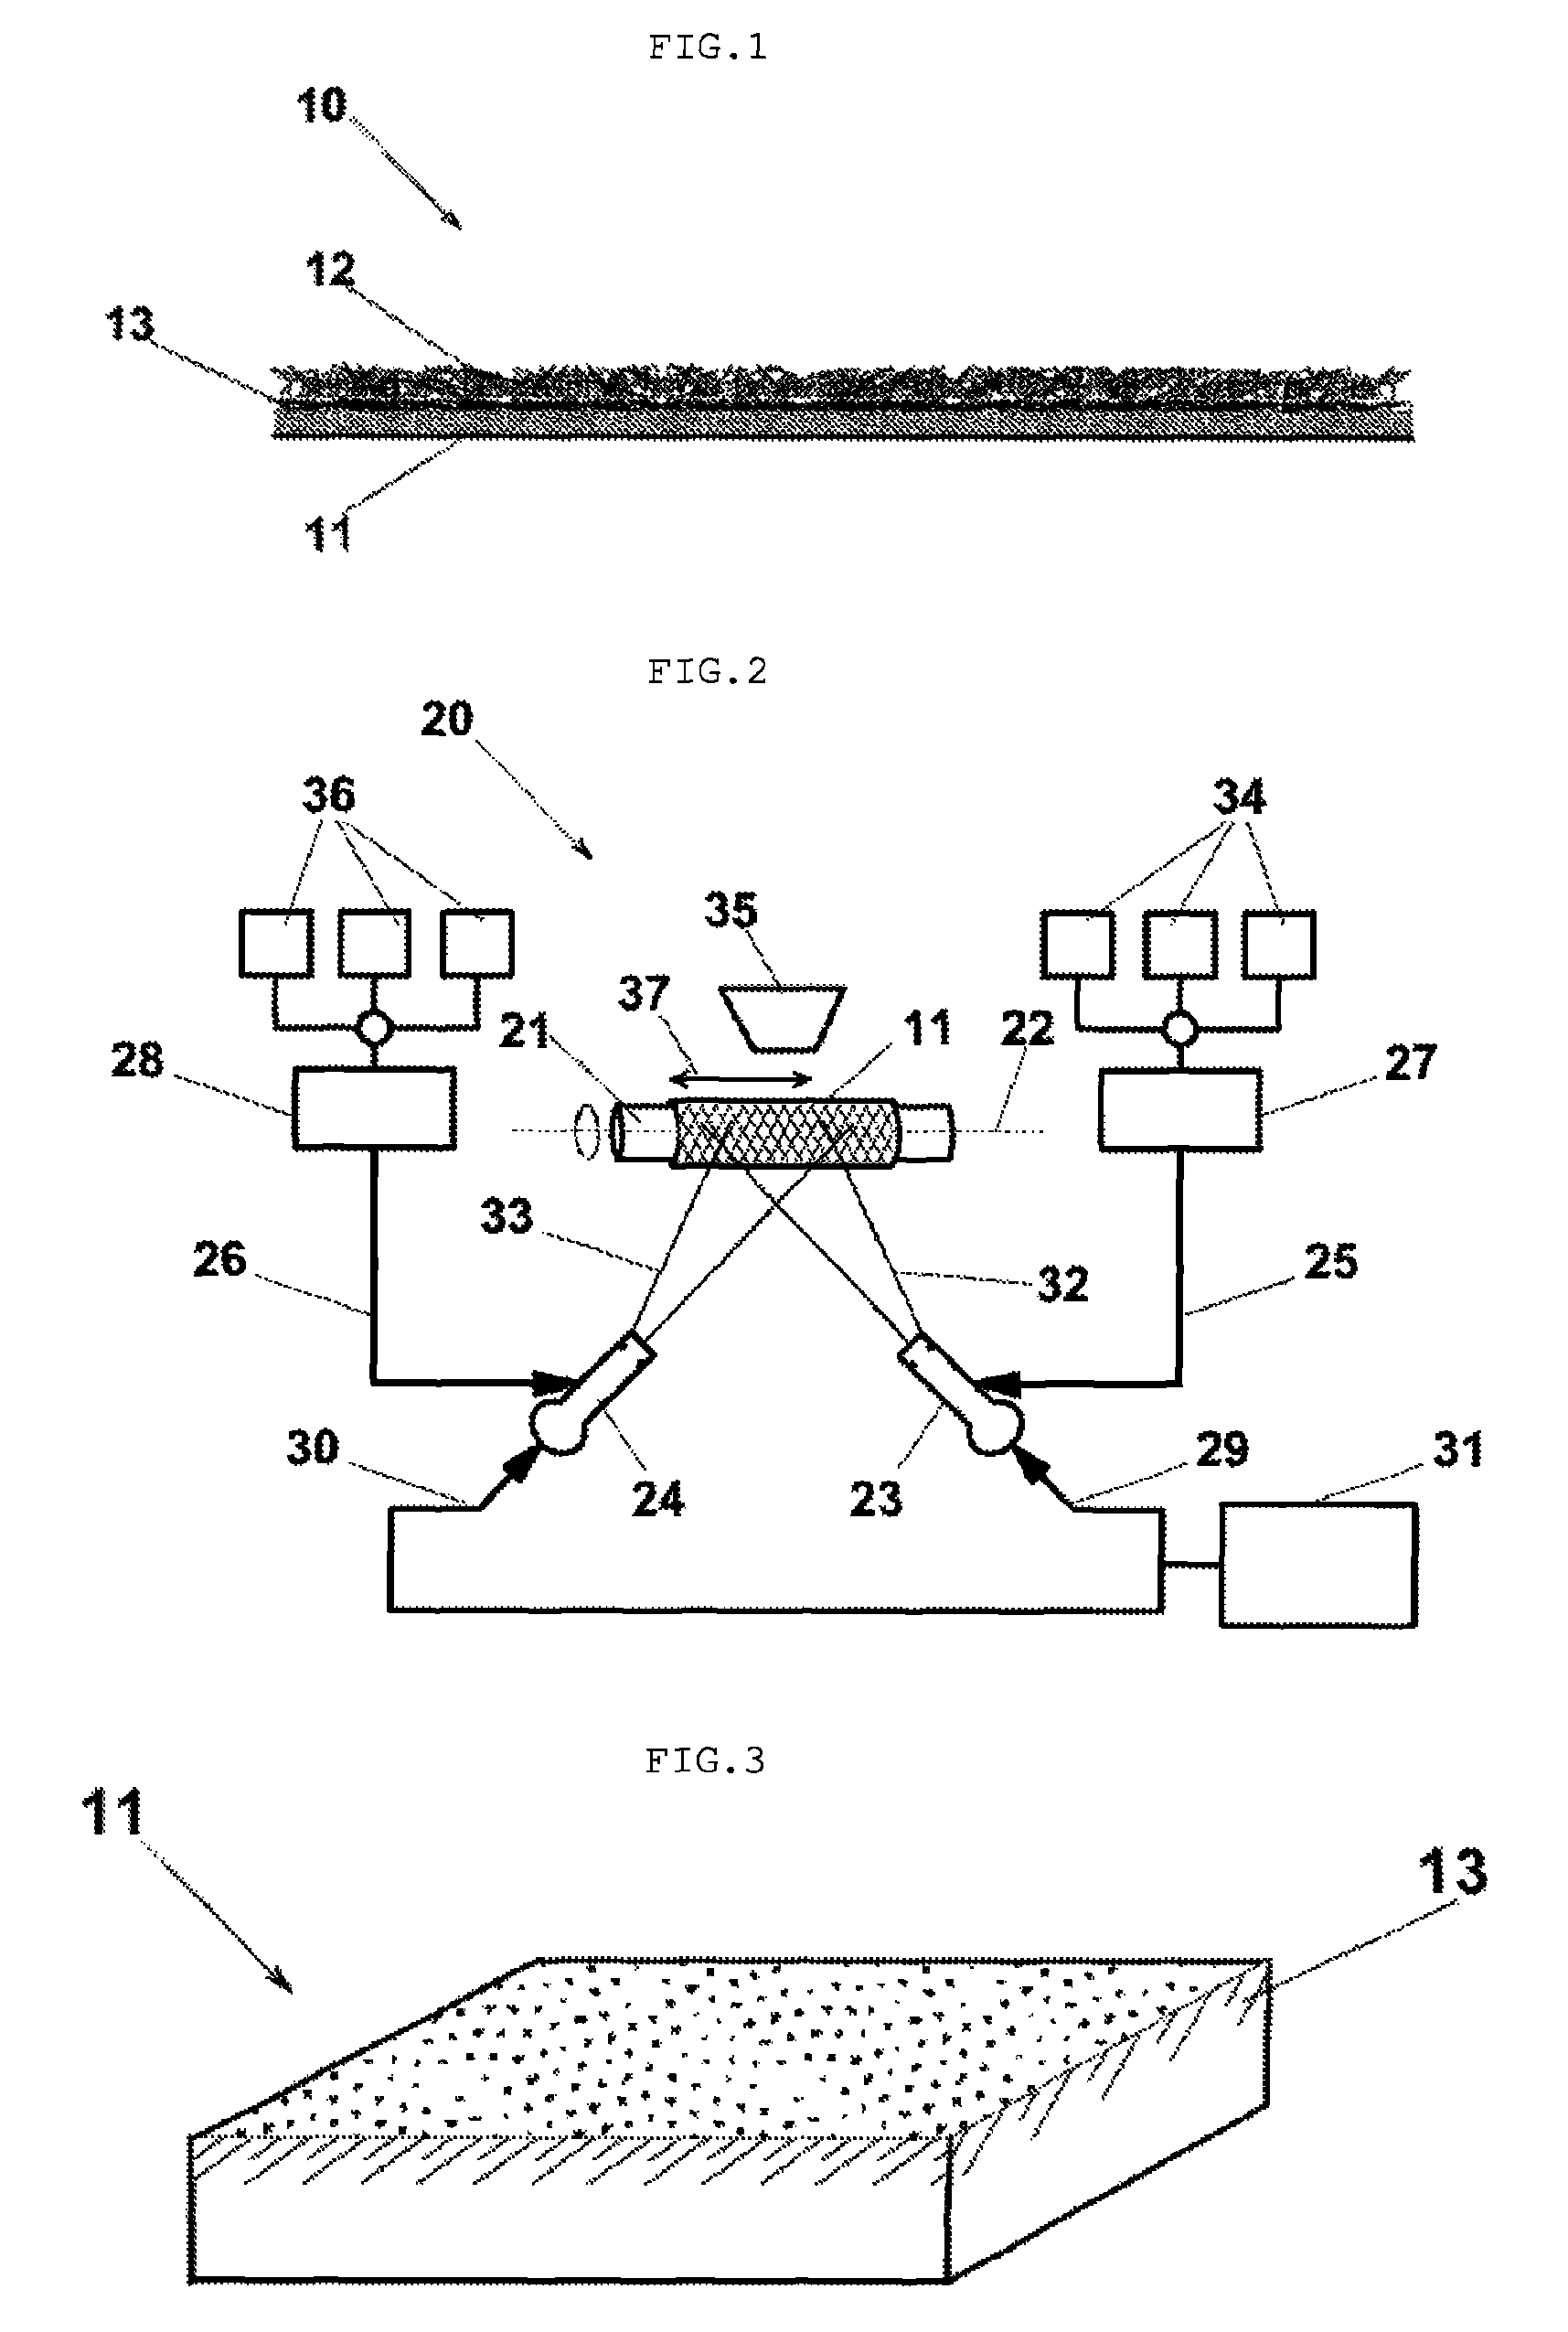 Method for producing a device applicable to biological tissues, particularly a patch for treating damaged tissues, and a device obtained by said method